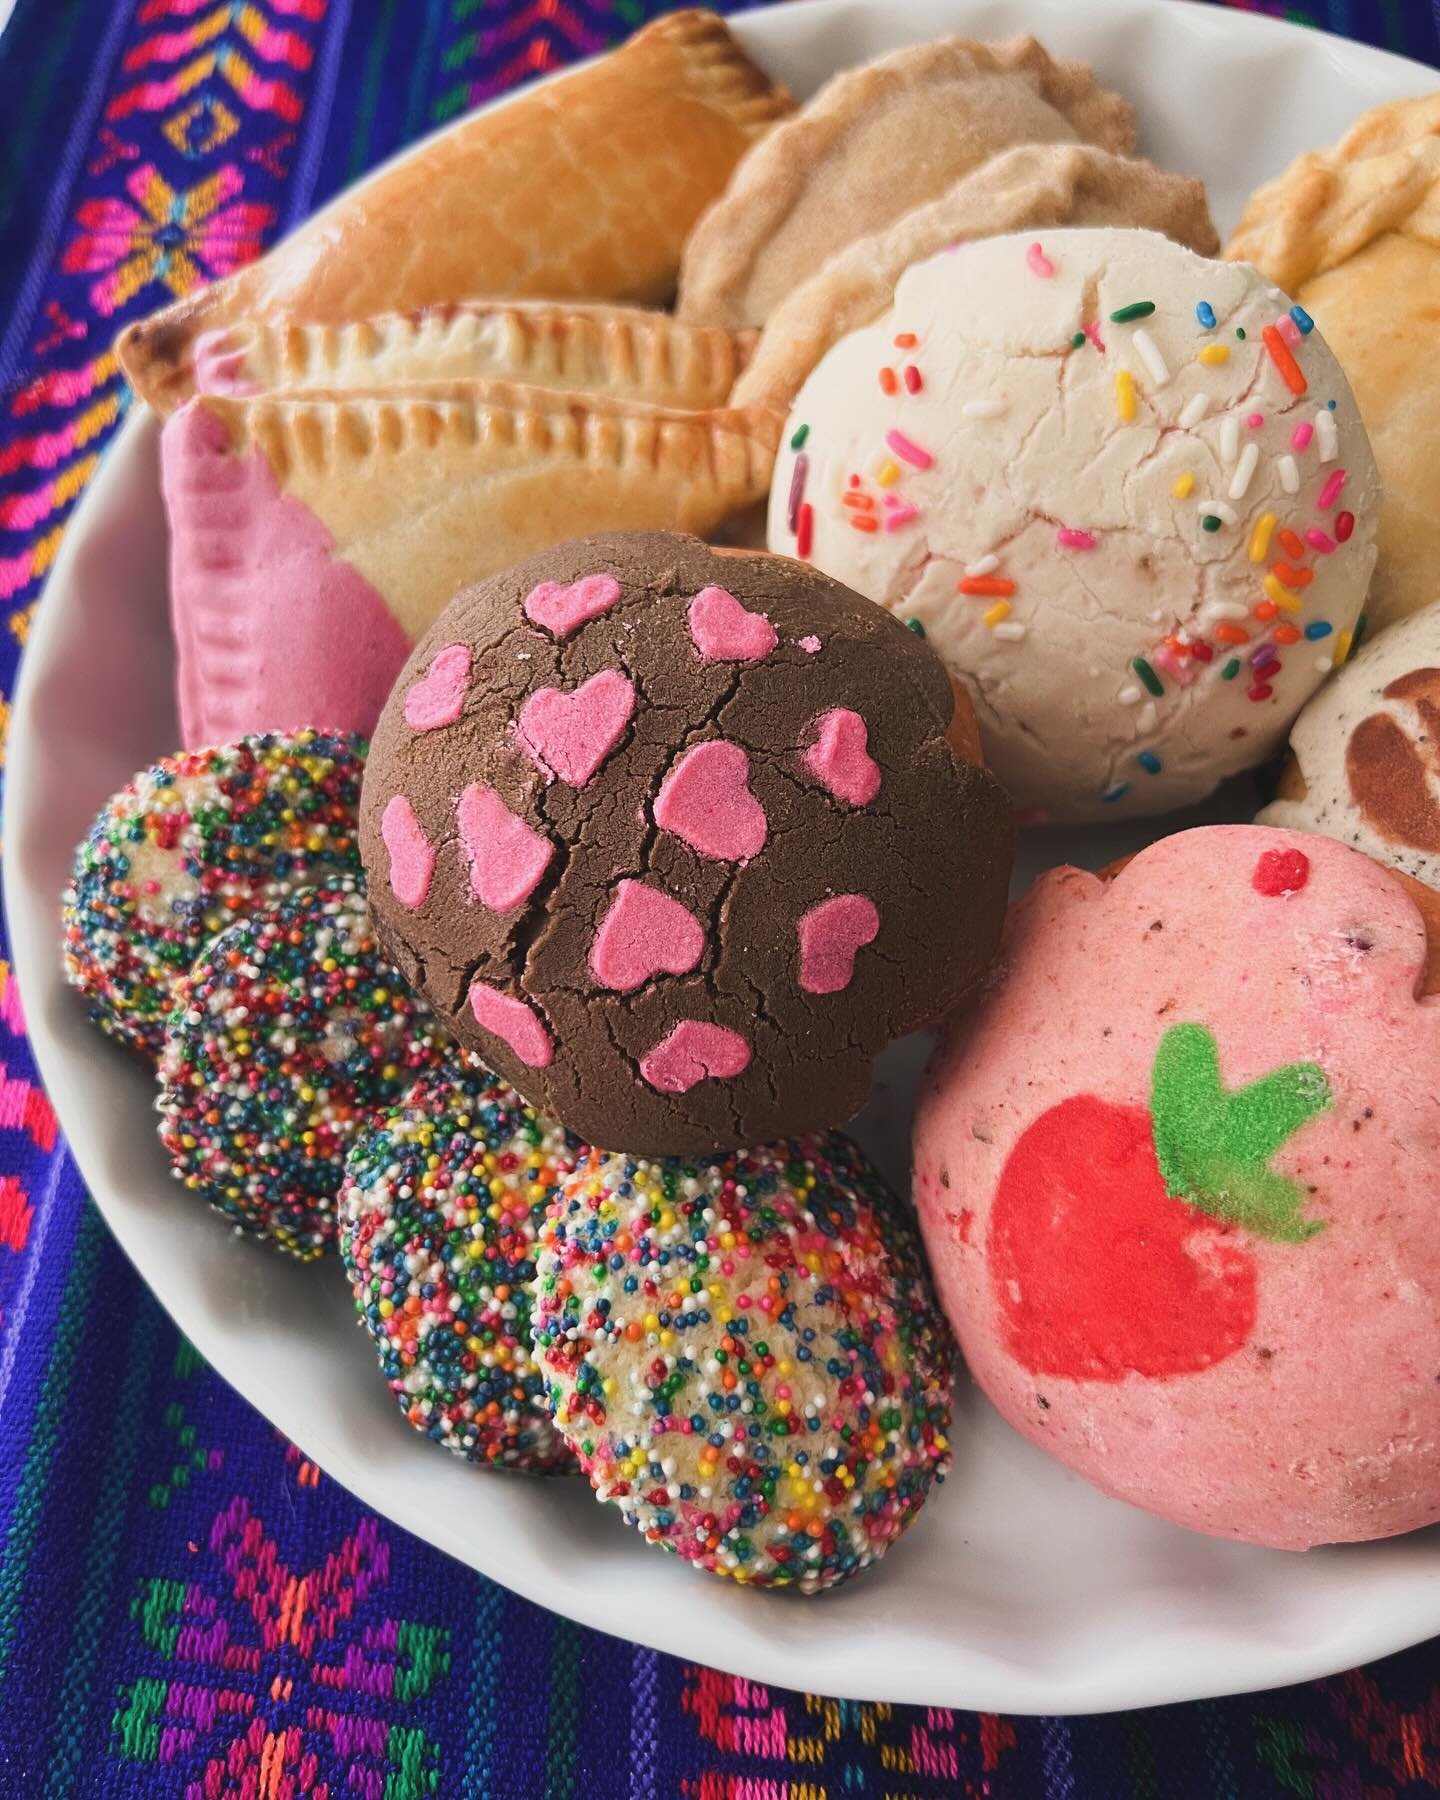 Our selection of pan dulce for the weekend of May 4-5th 🥰 

⭐️ Conchas | Flavors:  coffee, chocolate, funfetti, strawberry
⭐️ Empanadas | Flavors: apple, cherry hibiscus, dulce de leche, guava
⭐️ Cookies | Flavors: gragea (sprinkle), puerquito (ging